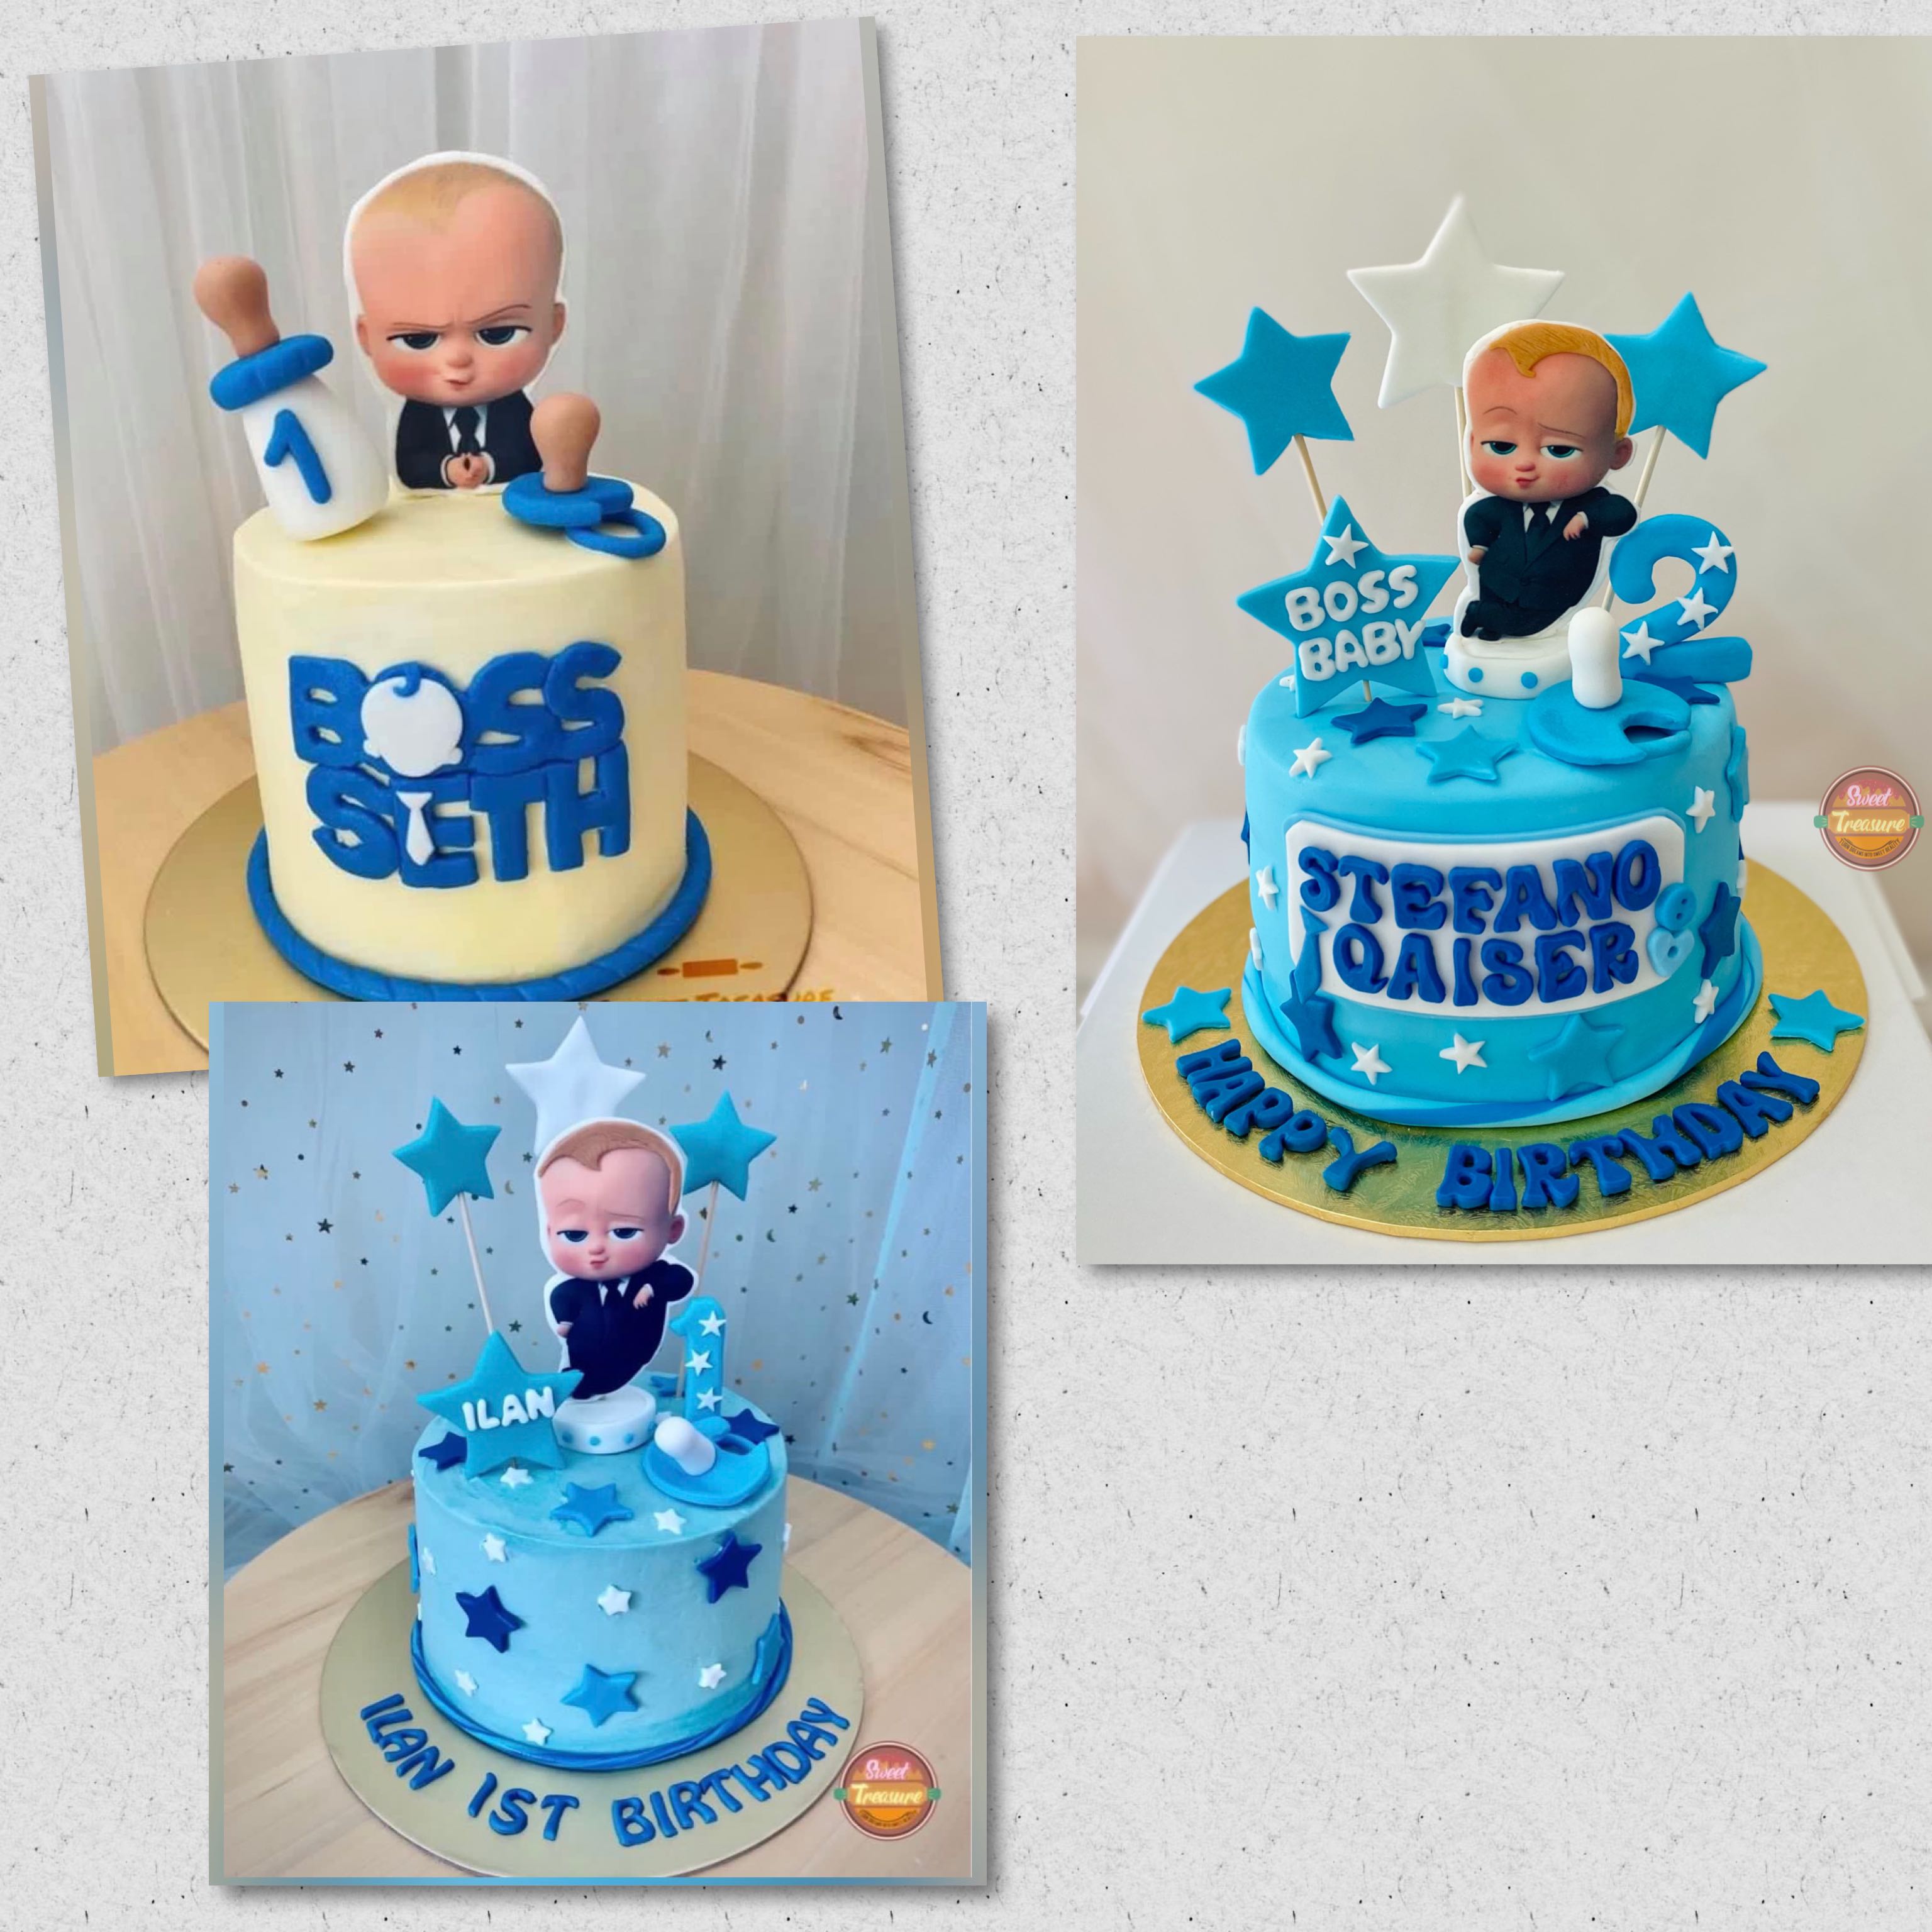 Buy Boss baby birthday cake online at cheap rate